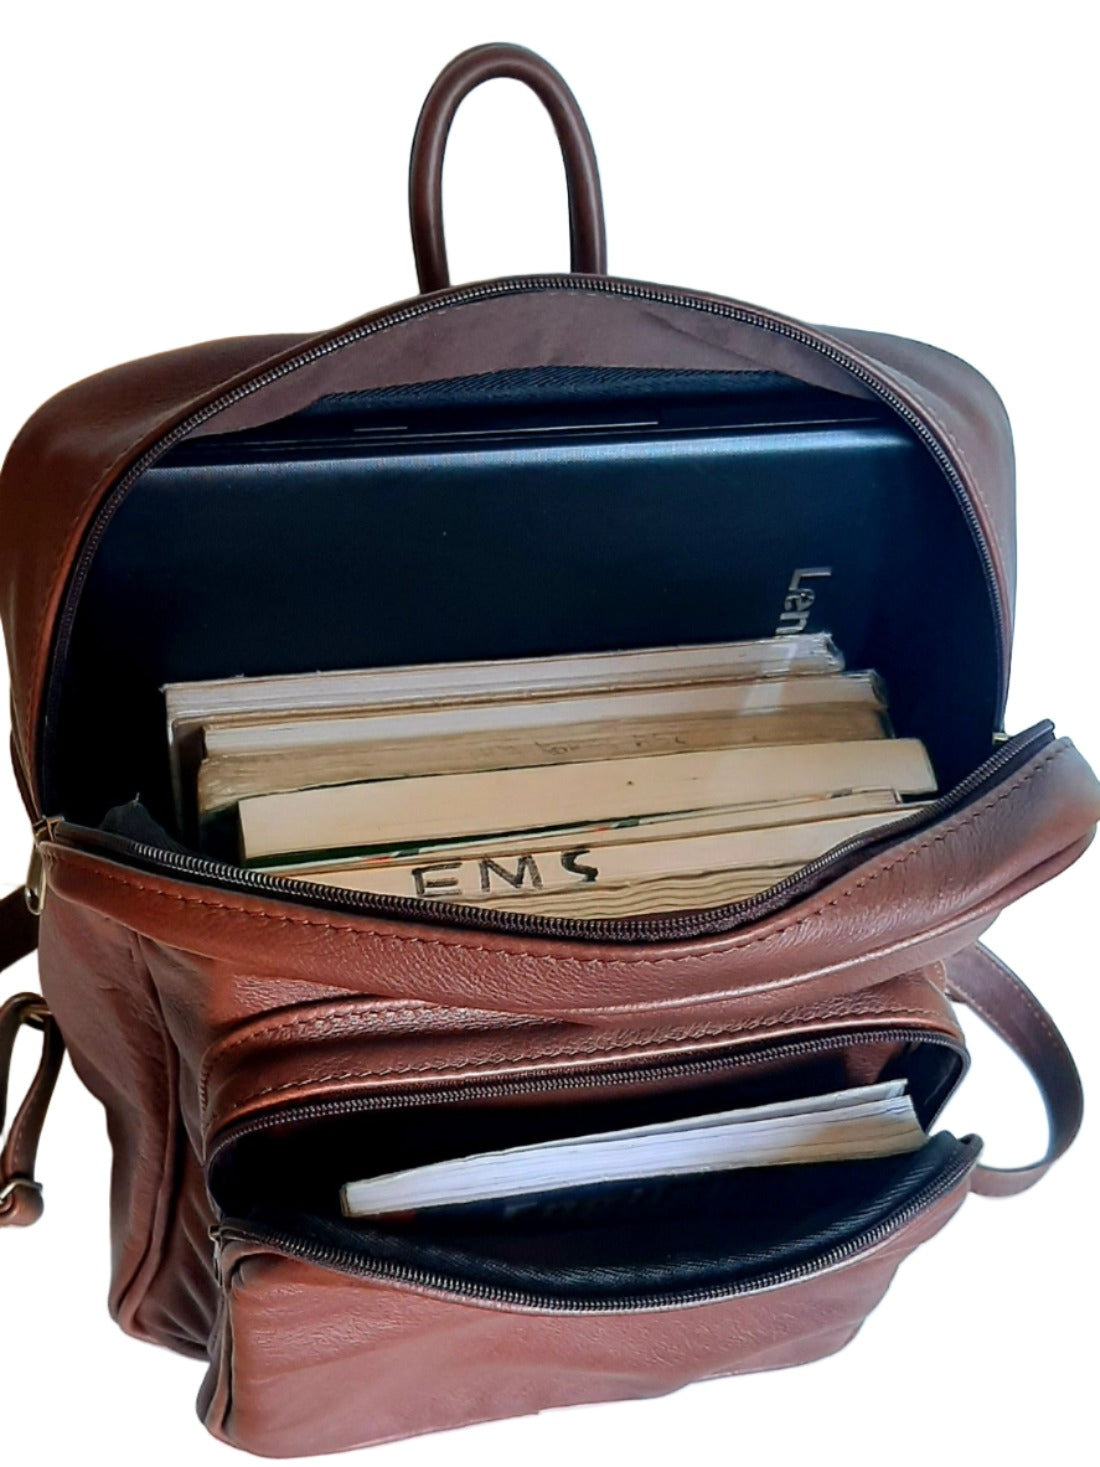 Open genuine leather backpack with 15" laptop and with books in. Designed by Cape Masai leather. 